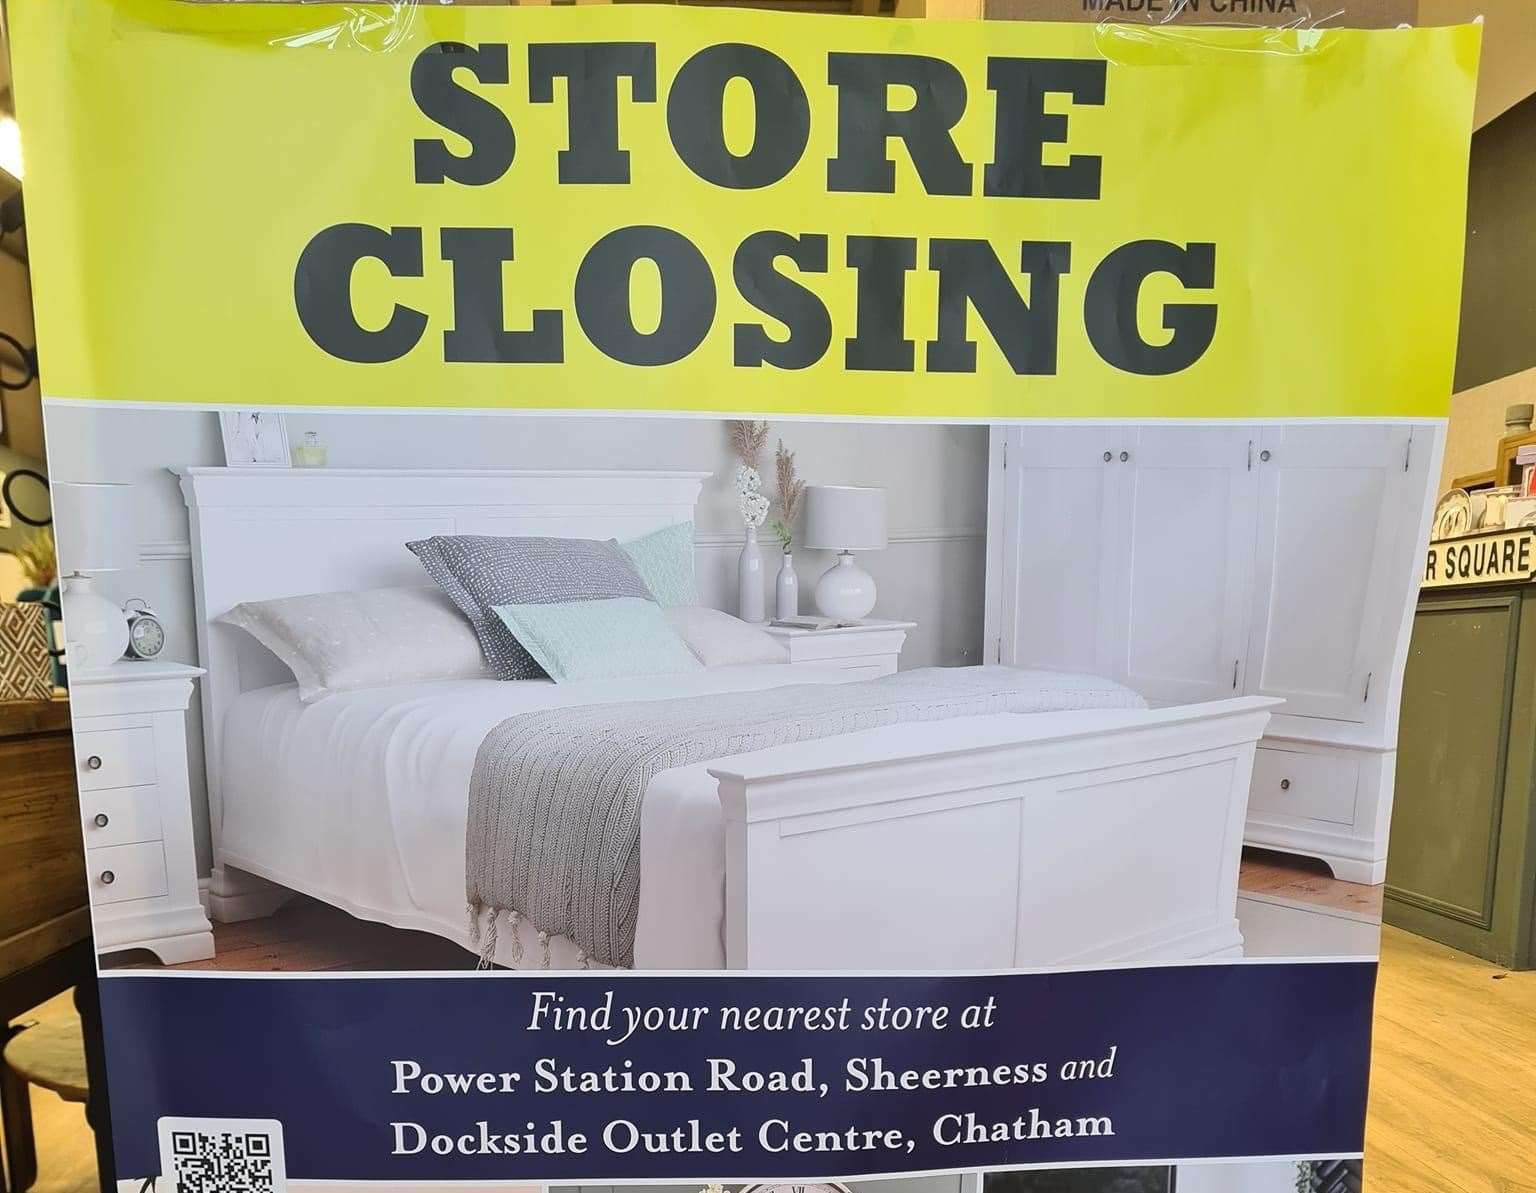 A sign has been spotted inside the store, warning customers of the closure